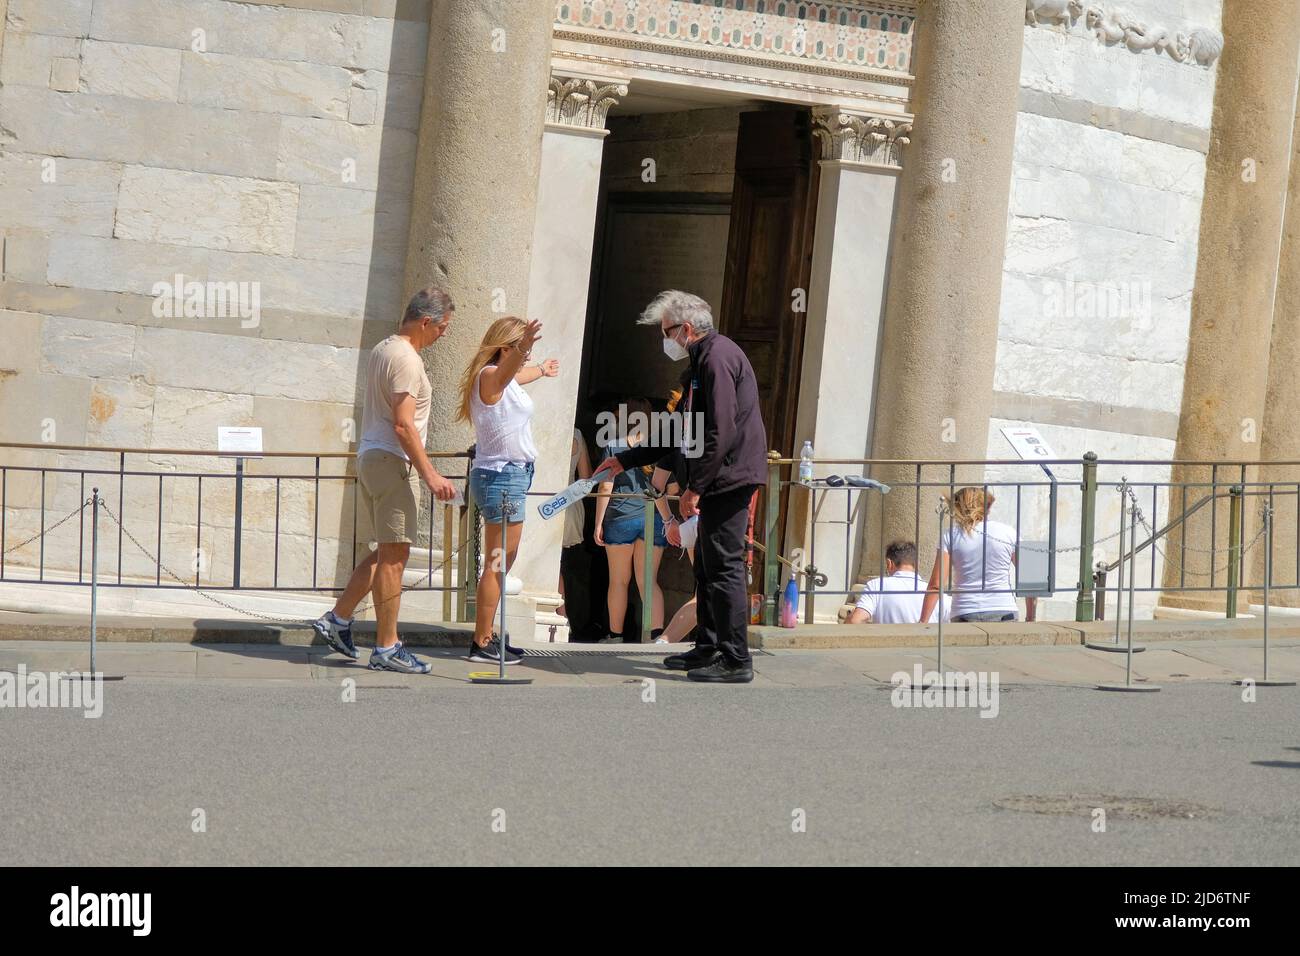 Pisa, Italy - June 8, 2022: Man checks tourists with metal detecting wand before enterin Leaning Tower of Pisa. Stock Photo